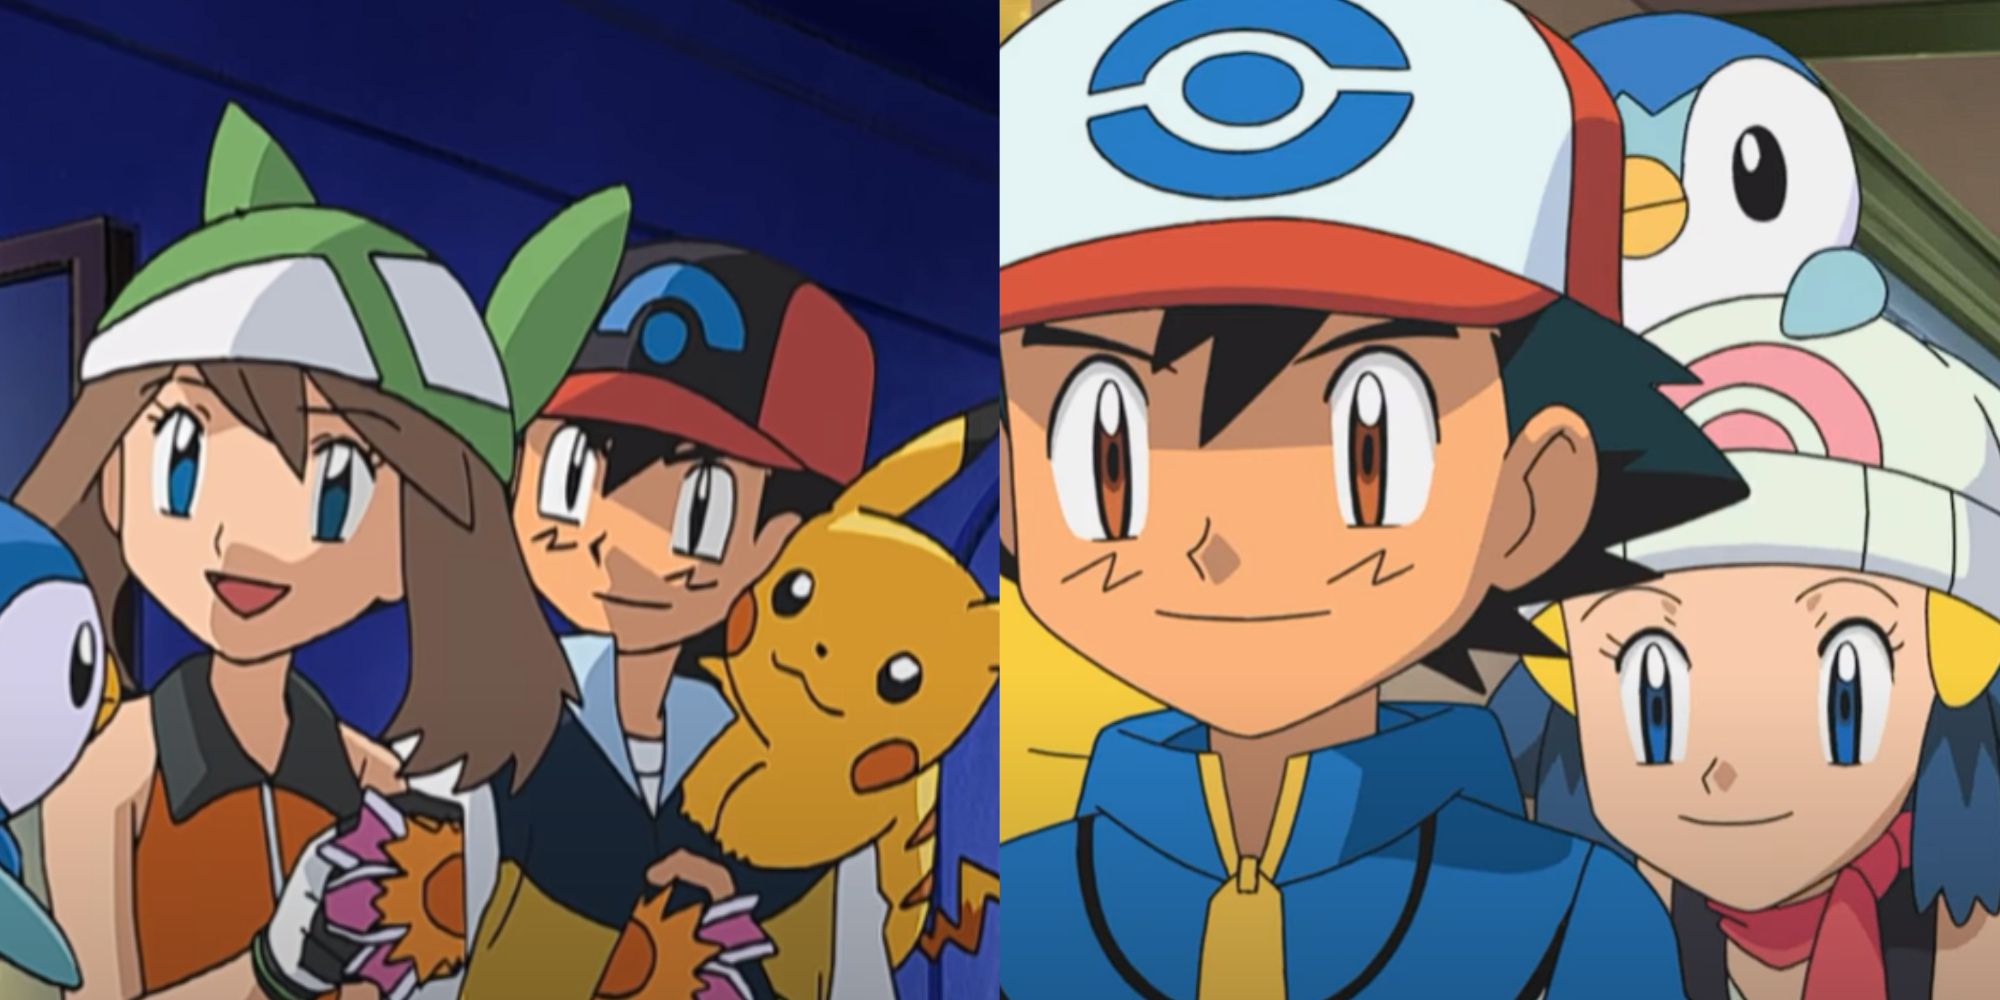 Pokémon Journeys - Summer Special Arc will feature Dawn and Piplup